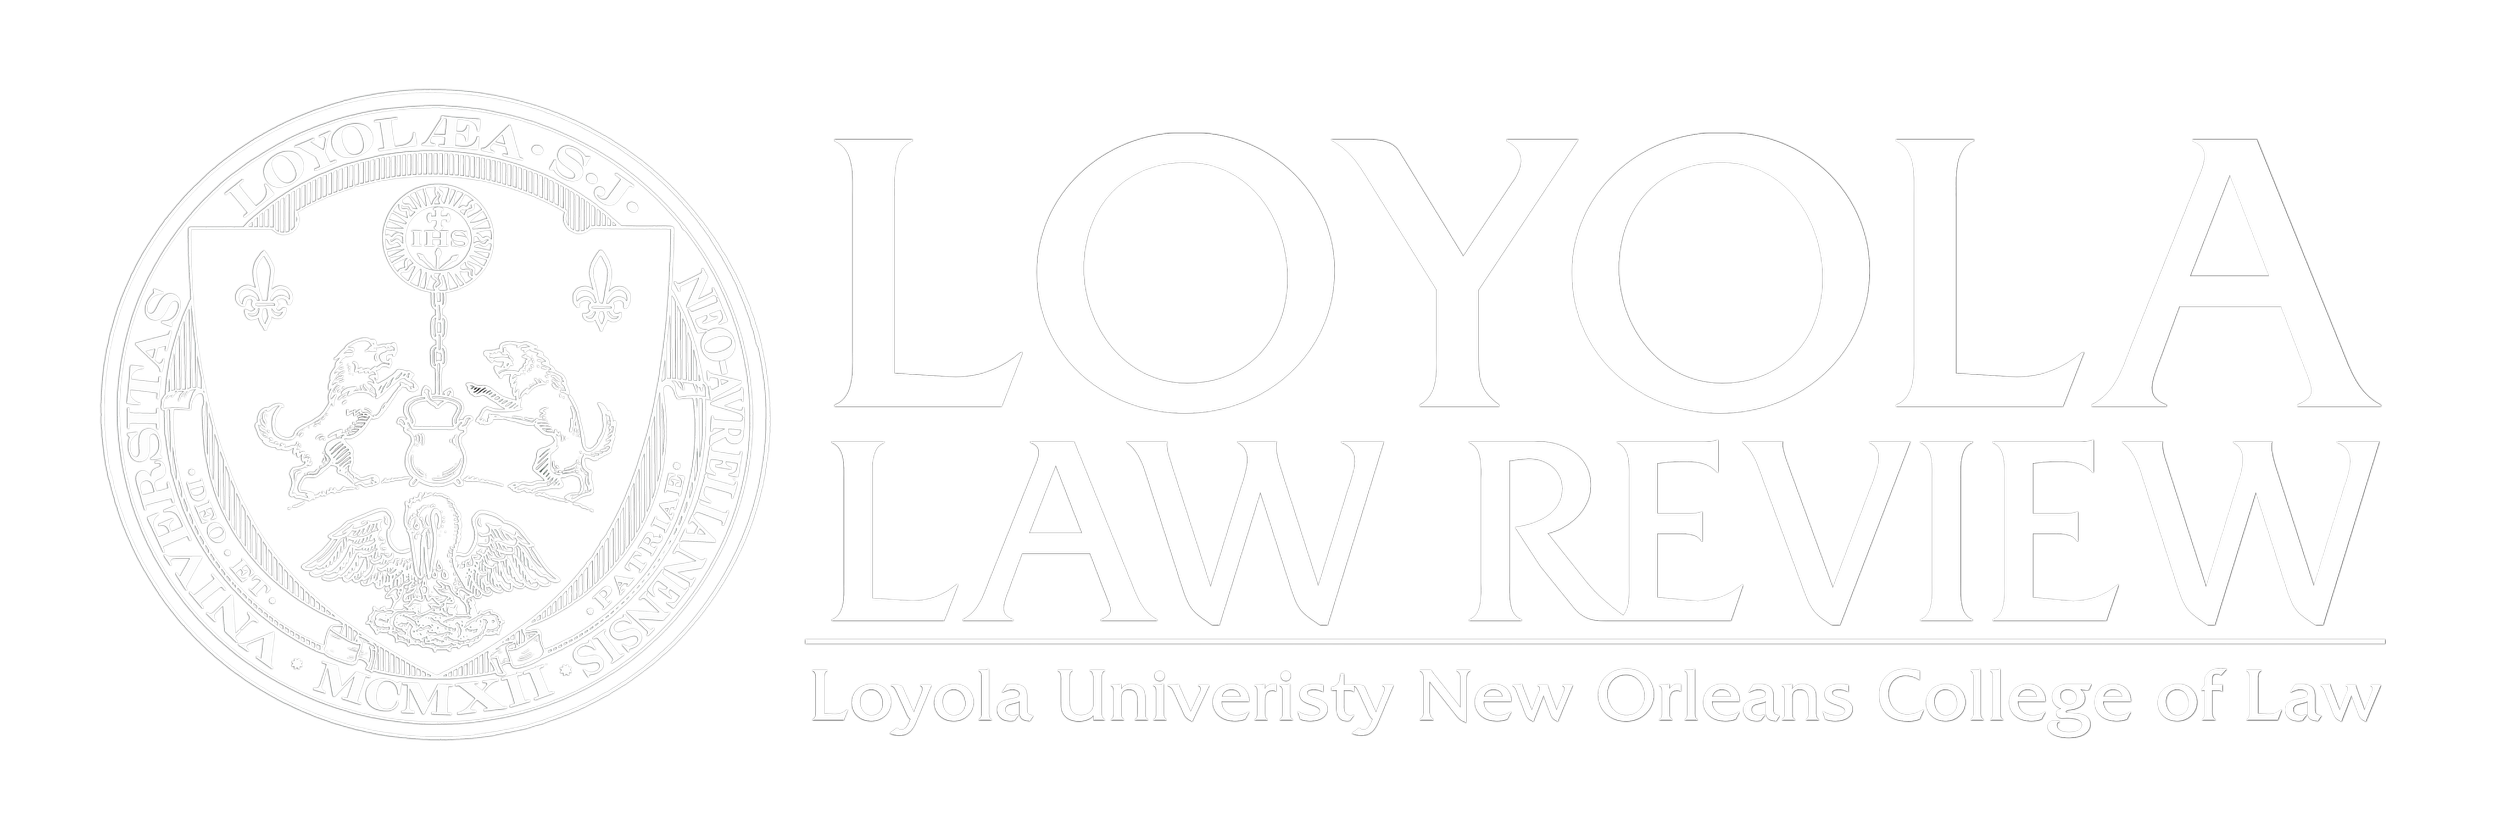 Best Practices - Find It: Journal Articles - LibGuides at Loyola University  New Orleans College of Law